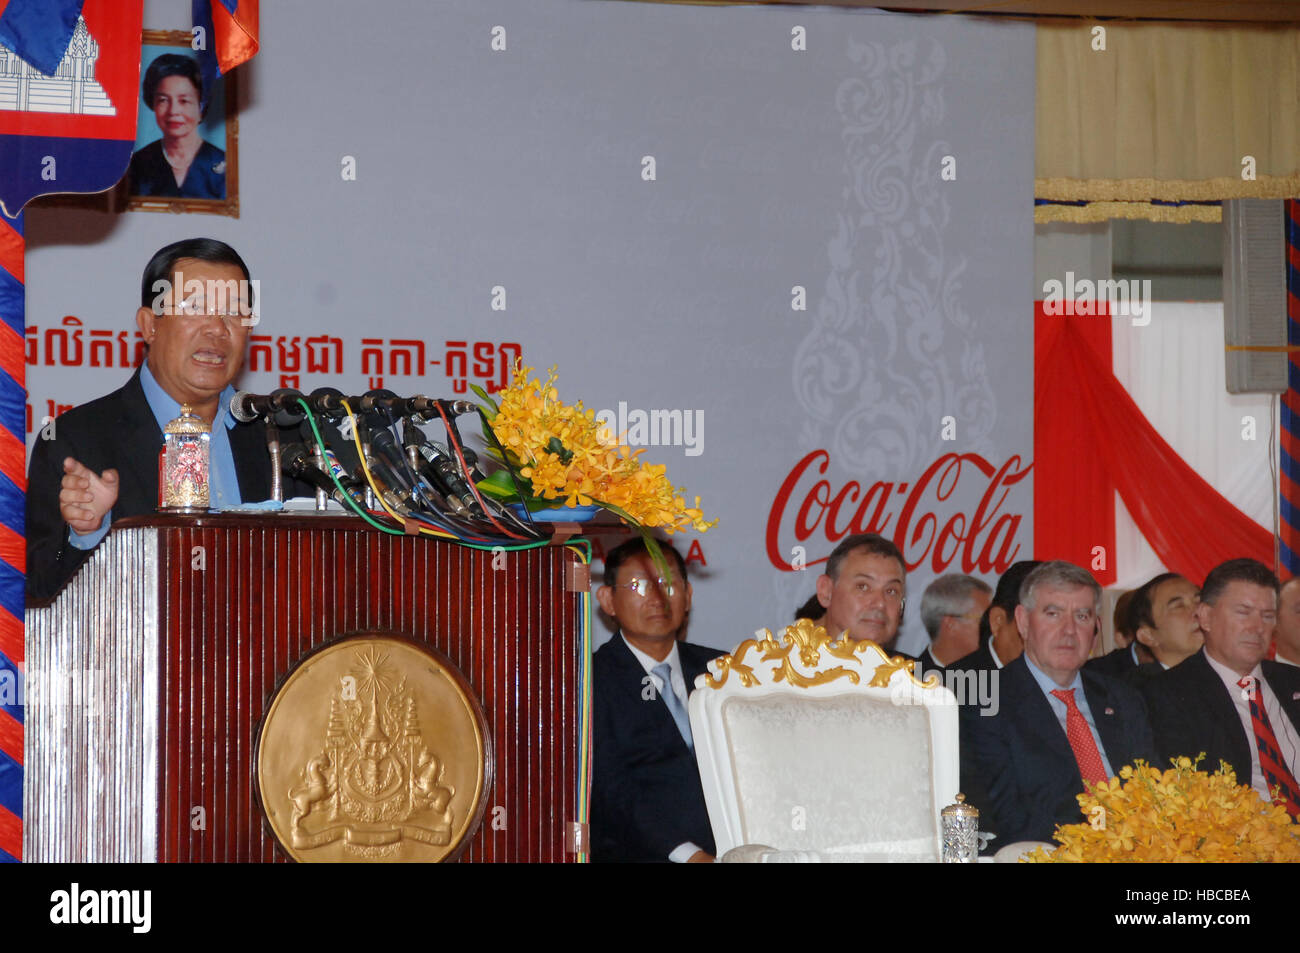 Phnom Penh, Cambodia. 5th Dec, 2016. Cambodian Prime Minister Samdech Techo Hun Sen (L) delivers a speech during the inauguration ceremony of a new Coca-Cola factory in Phnom Penh, Cambodia, Dec. 5, 2016. Coca-Cola Company on Monday inaugurated its new 100-million-U.S.-dollar production facility at the Phnom Penh Special Economic Zone. © Sovannara/Xinhua/Alamy Live News Stock Photo